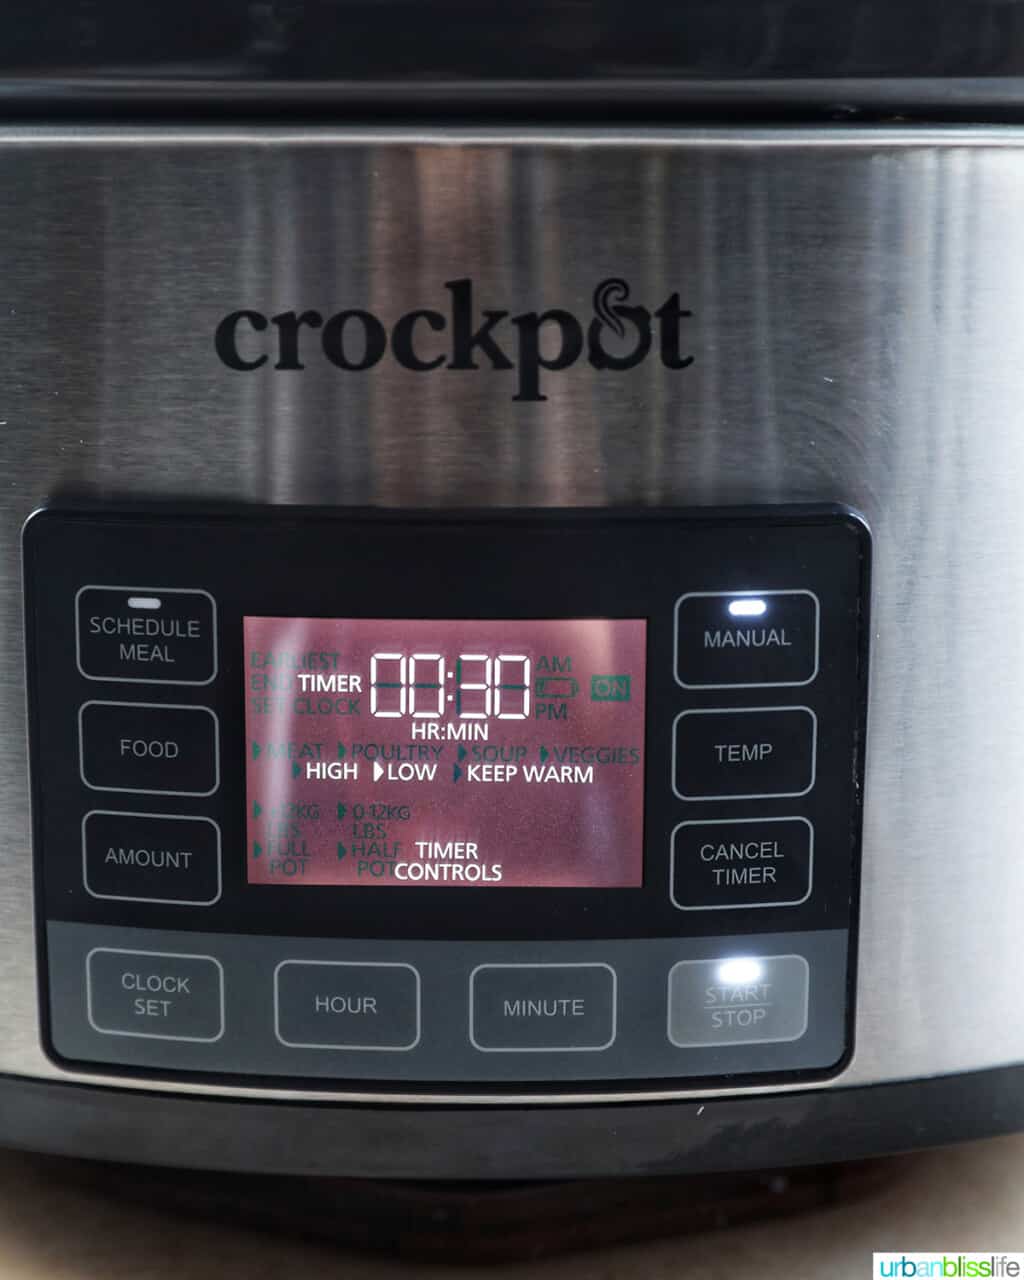 crockpot set for 30 minutes on low heat